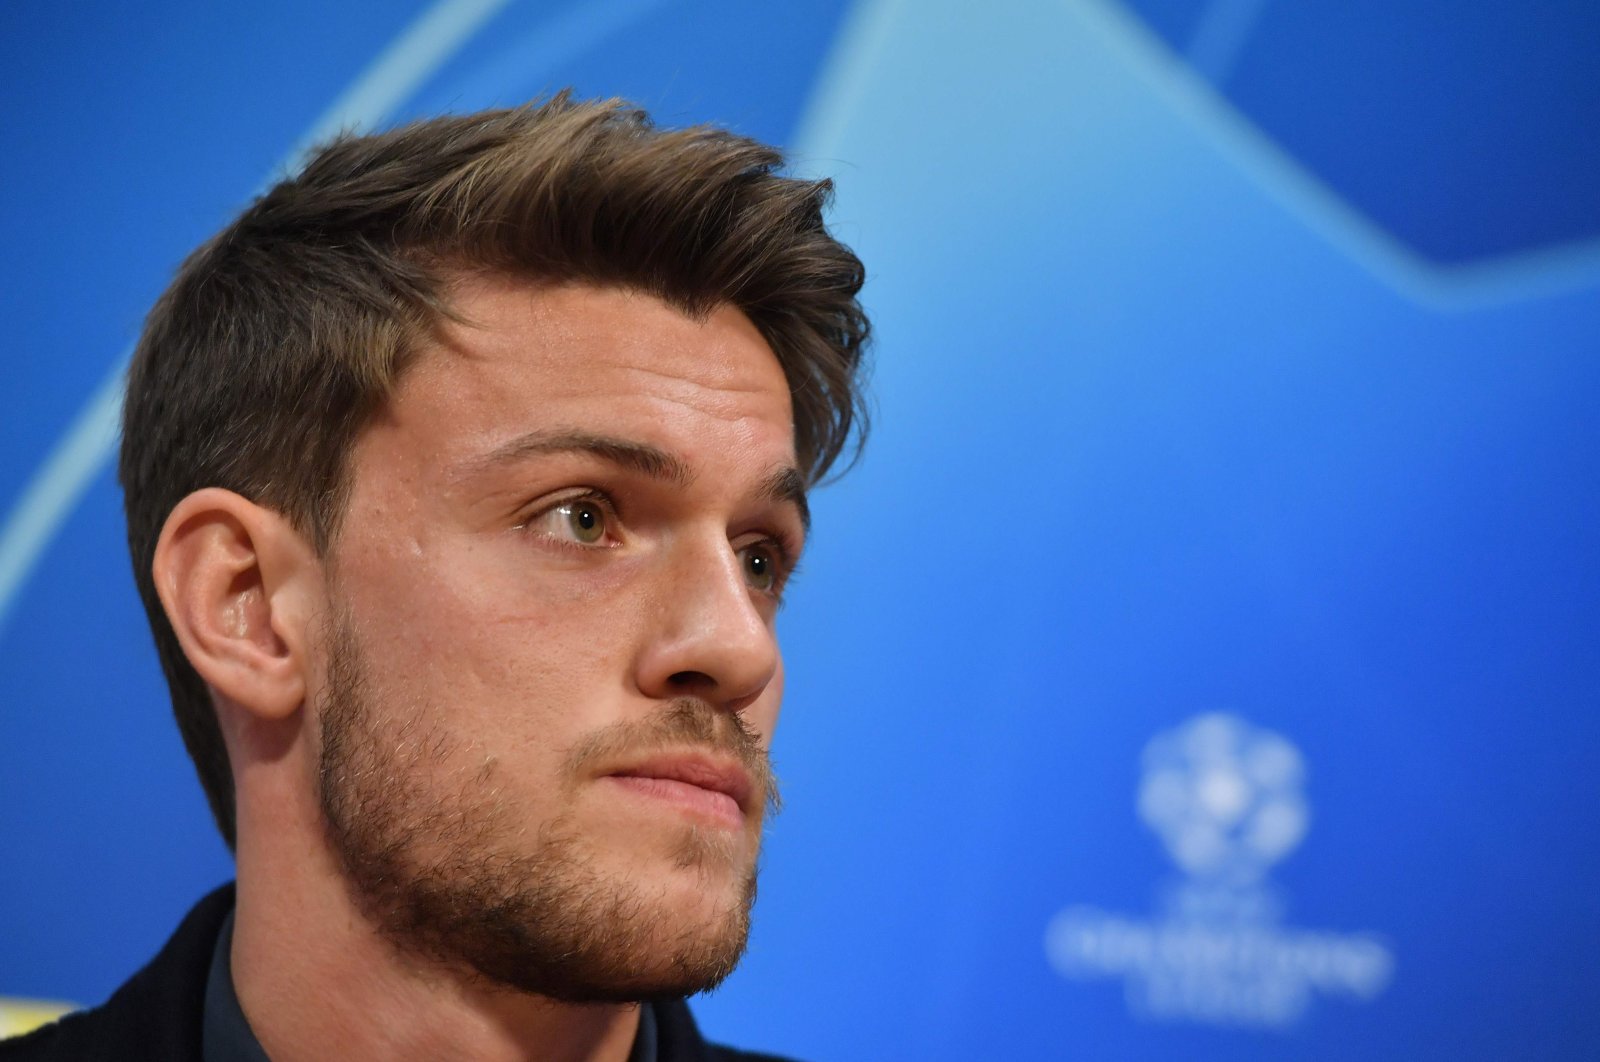 In this April 9, 2019, file photo, Juventus' Daniele Rugani answers questions during a press conference at the Johan Cruyff ArenA in Amsterdam, Netherlands. (AFP Photo)